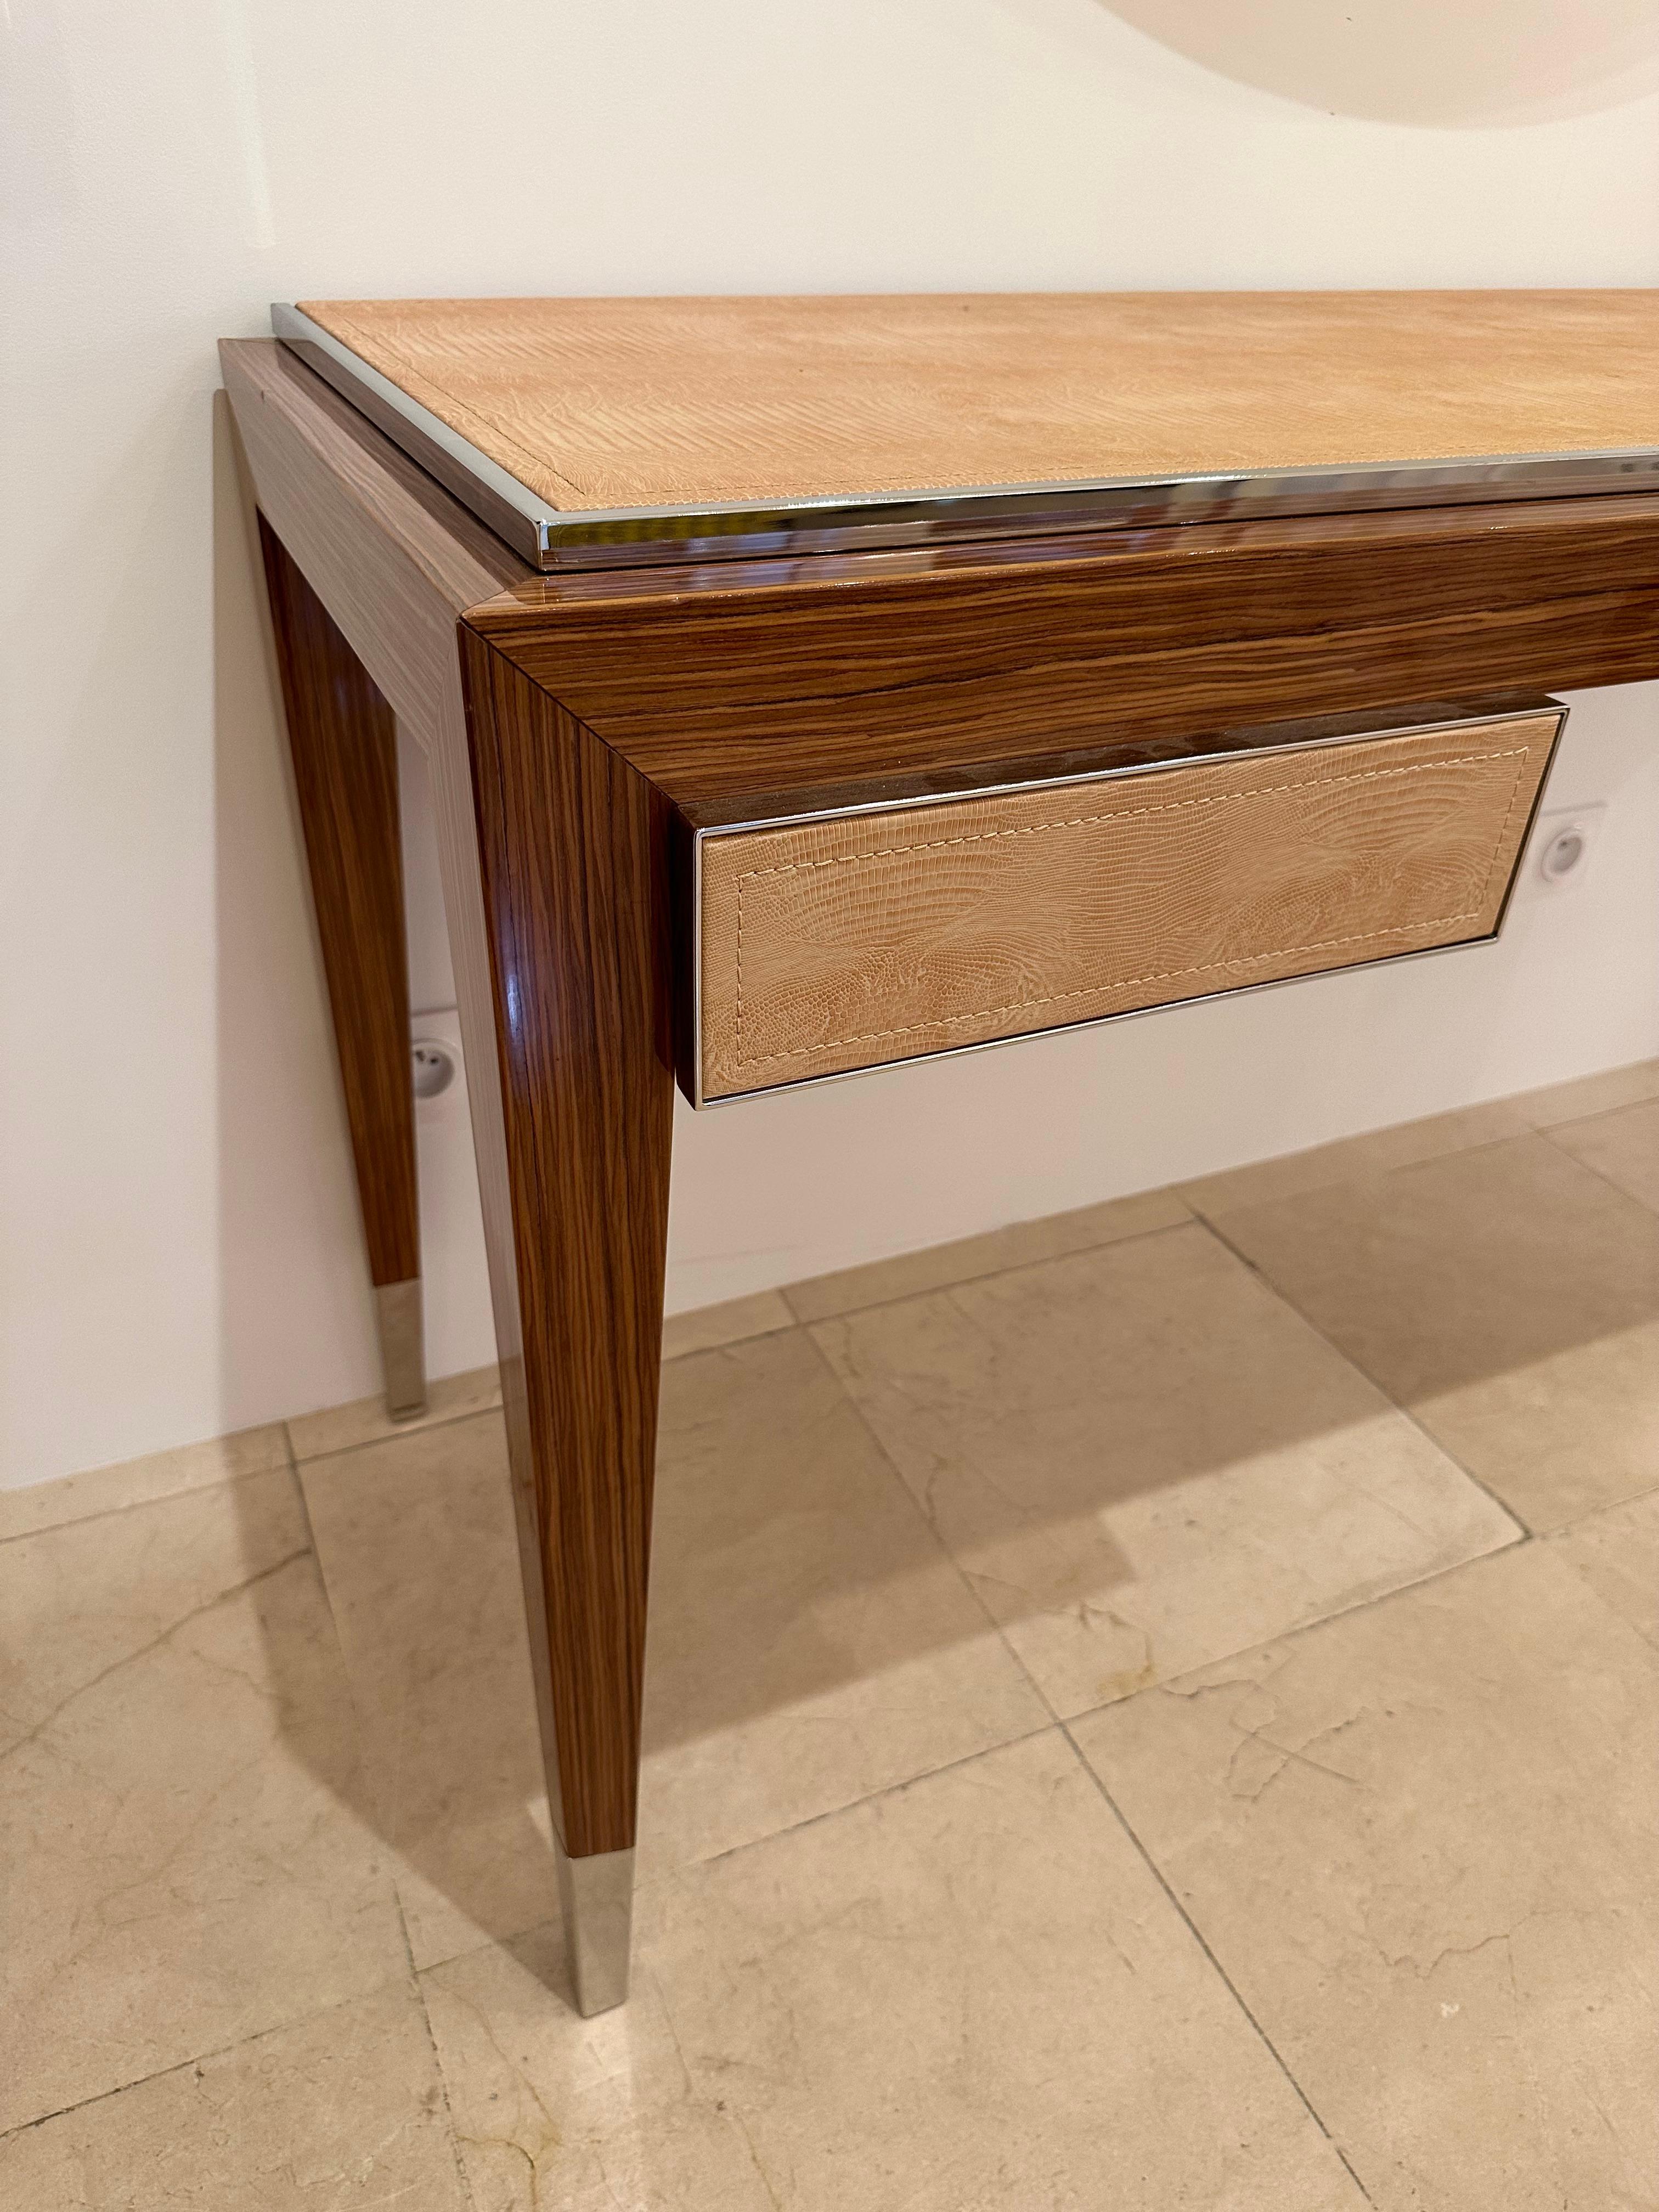 High manufacturing writing desk or console table in zebrano wood, metal and leather by the italian design manufacture Gervasoni. 2 drawers with a slow sliding high quality system. In a Mid-Century Modern Art Deco style.